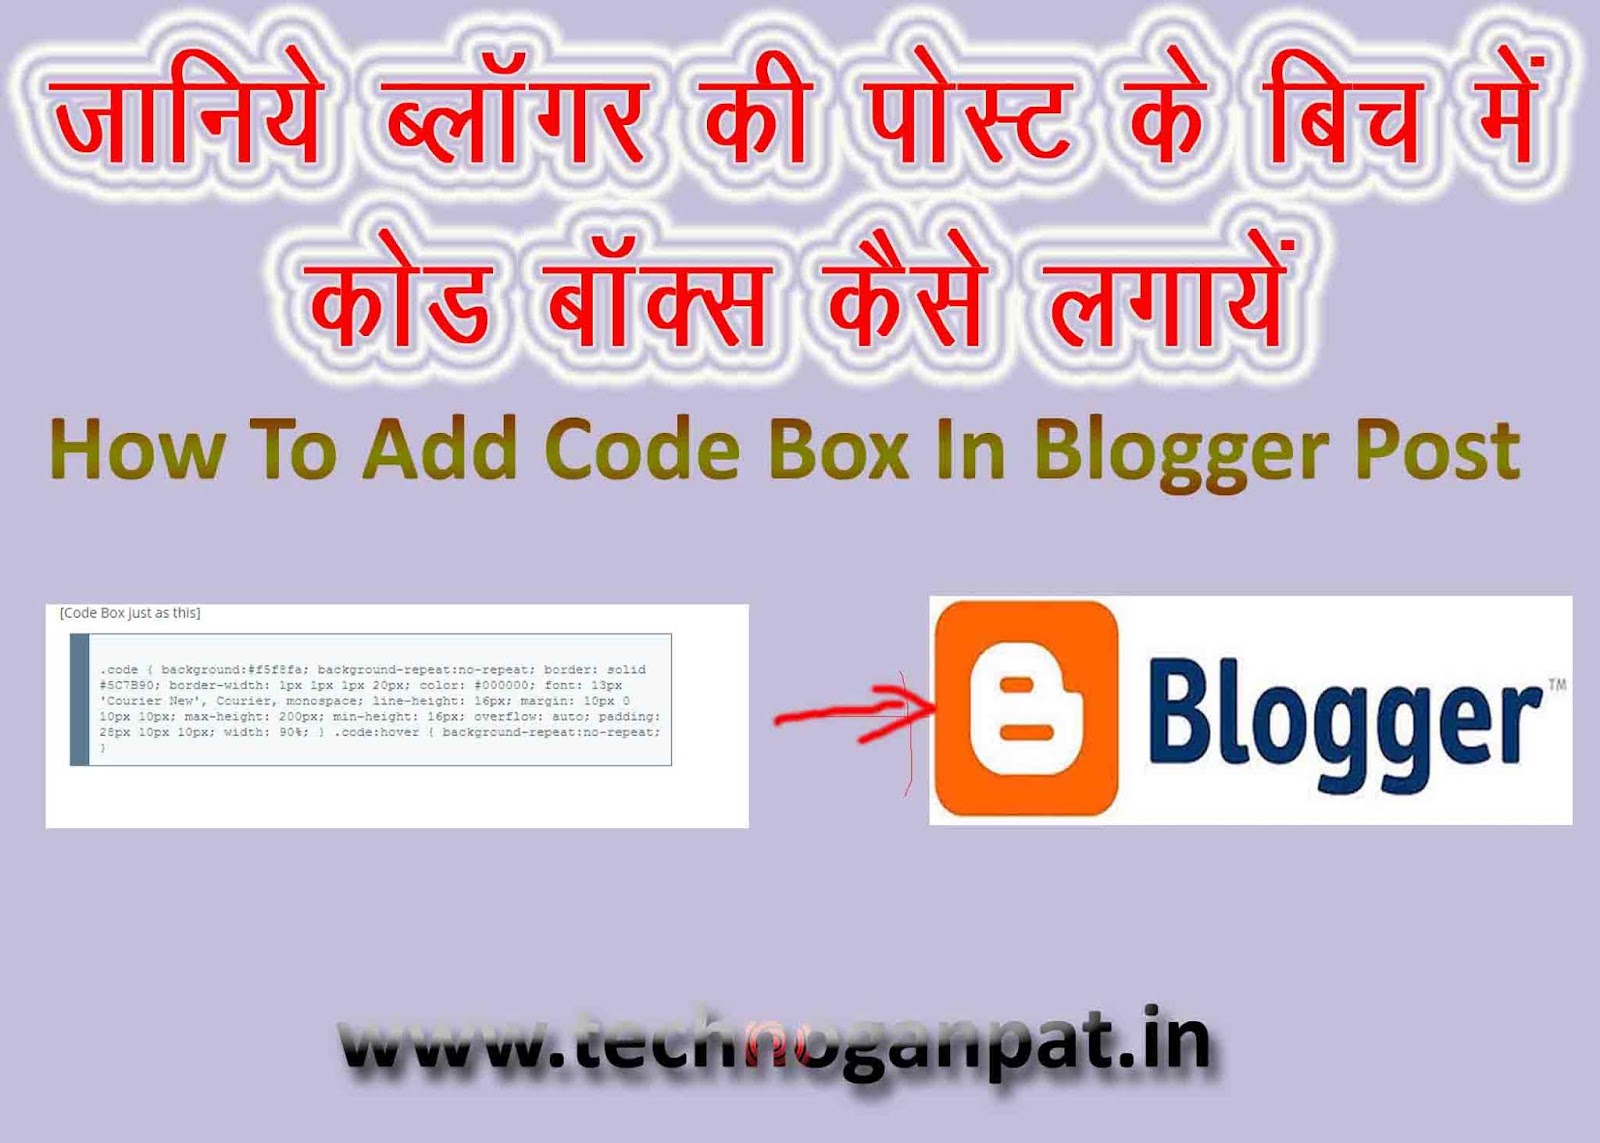 How To Add Html Code Box Blogger Blog Post - Full Guide